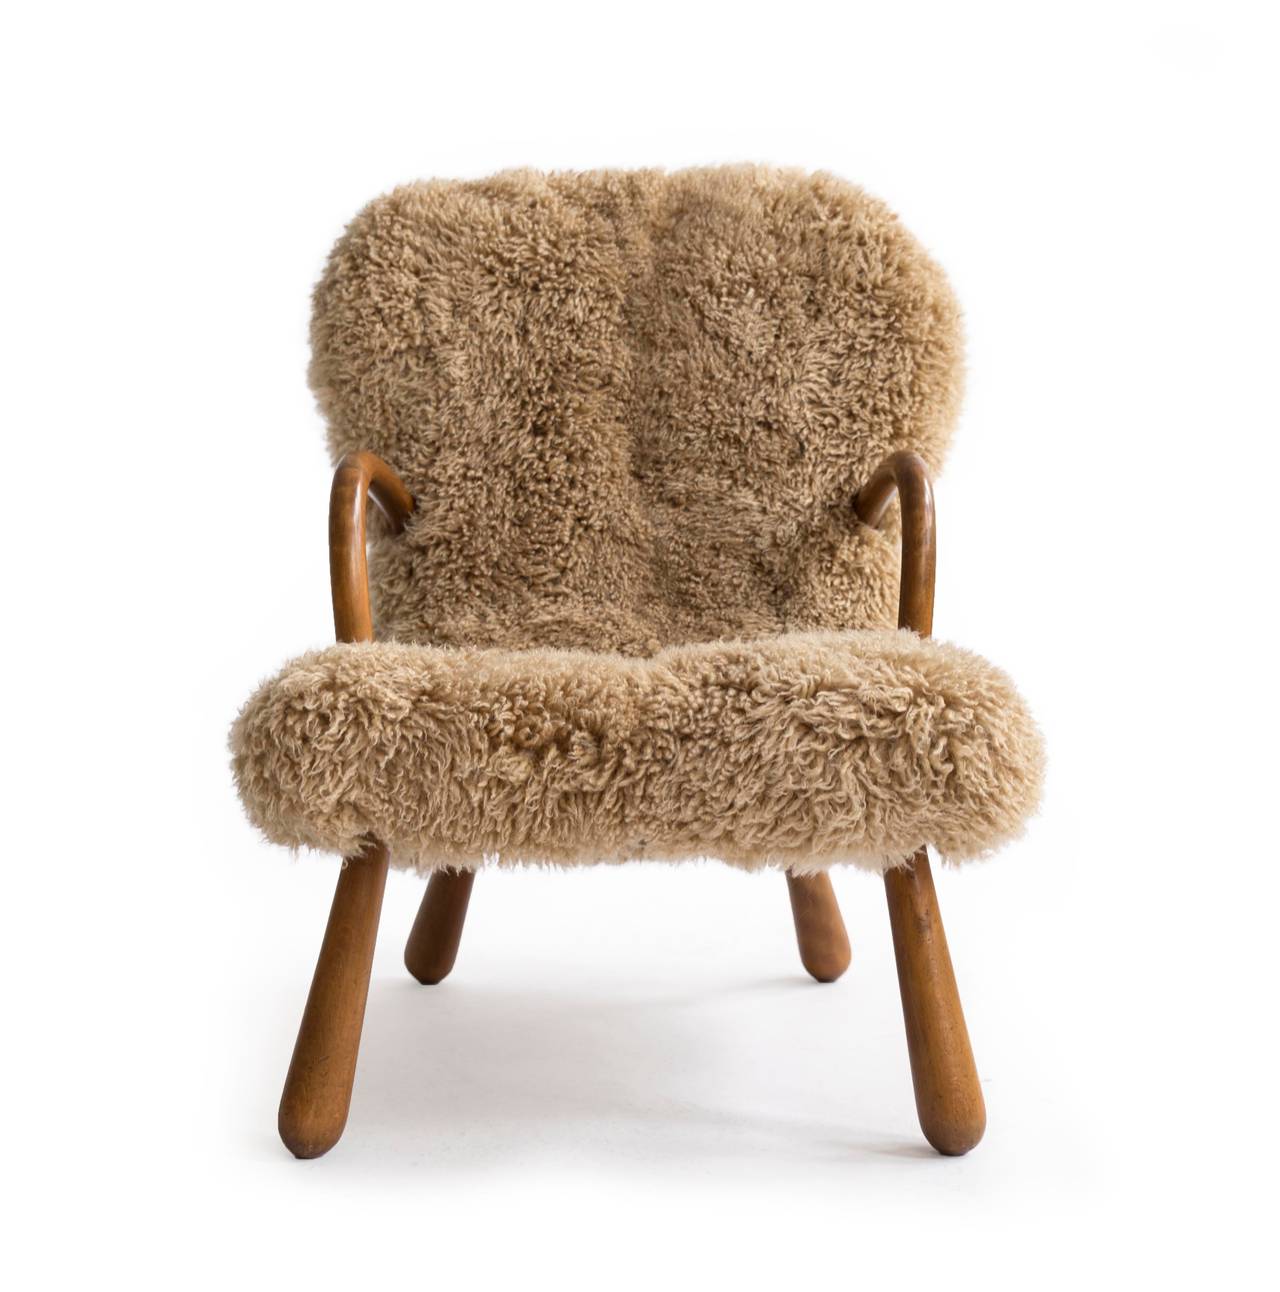 Expressive lounge chair with arms and legs of stained beech upholstered with  brown long haired lambskin. 

Made and designed by unknown Danish cabinetmaker app. 1940s. 

Fine condition.